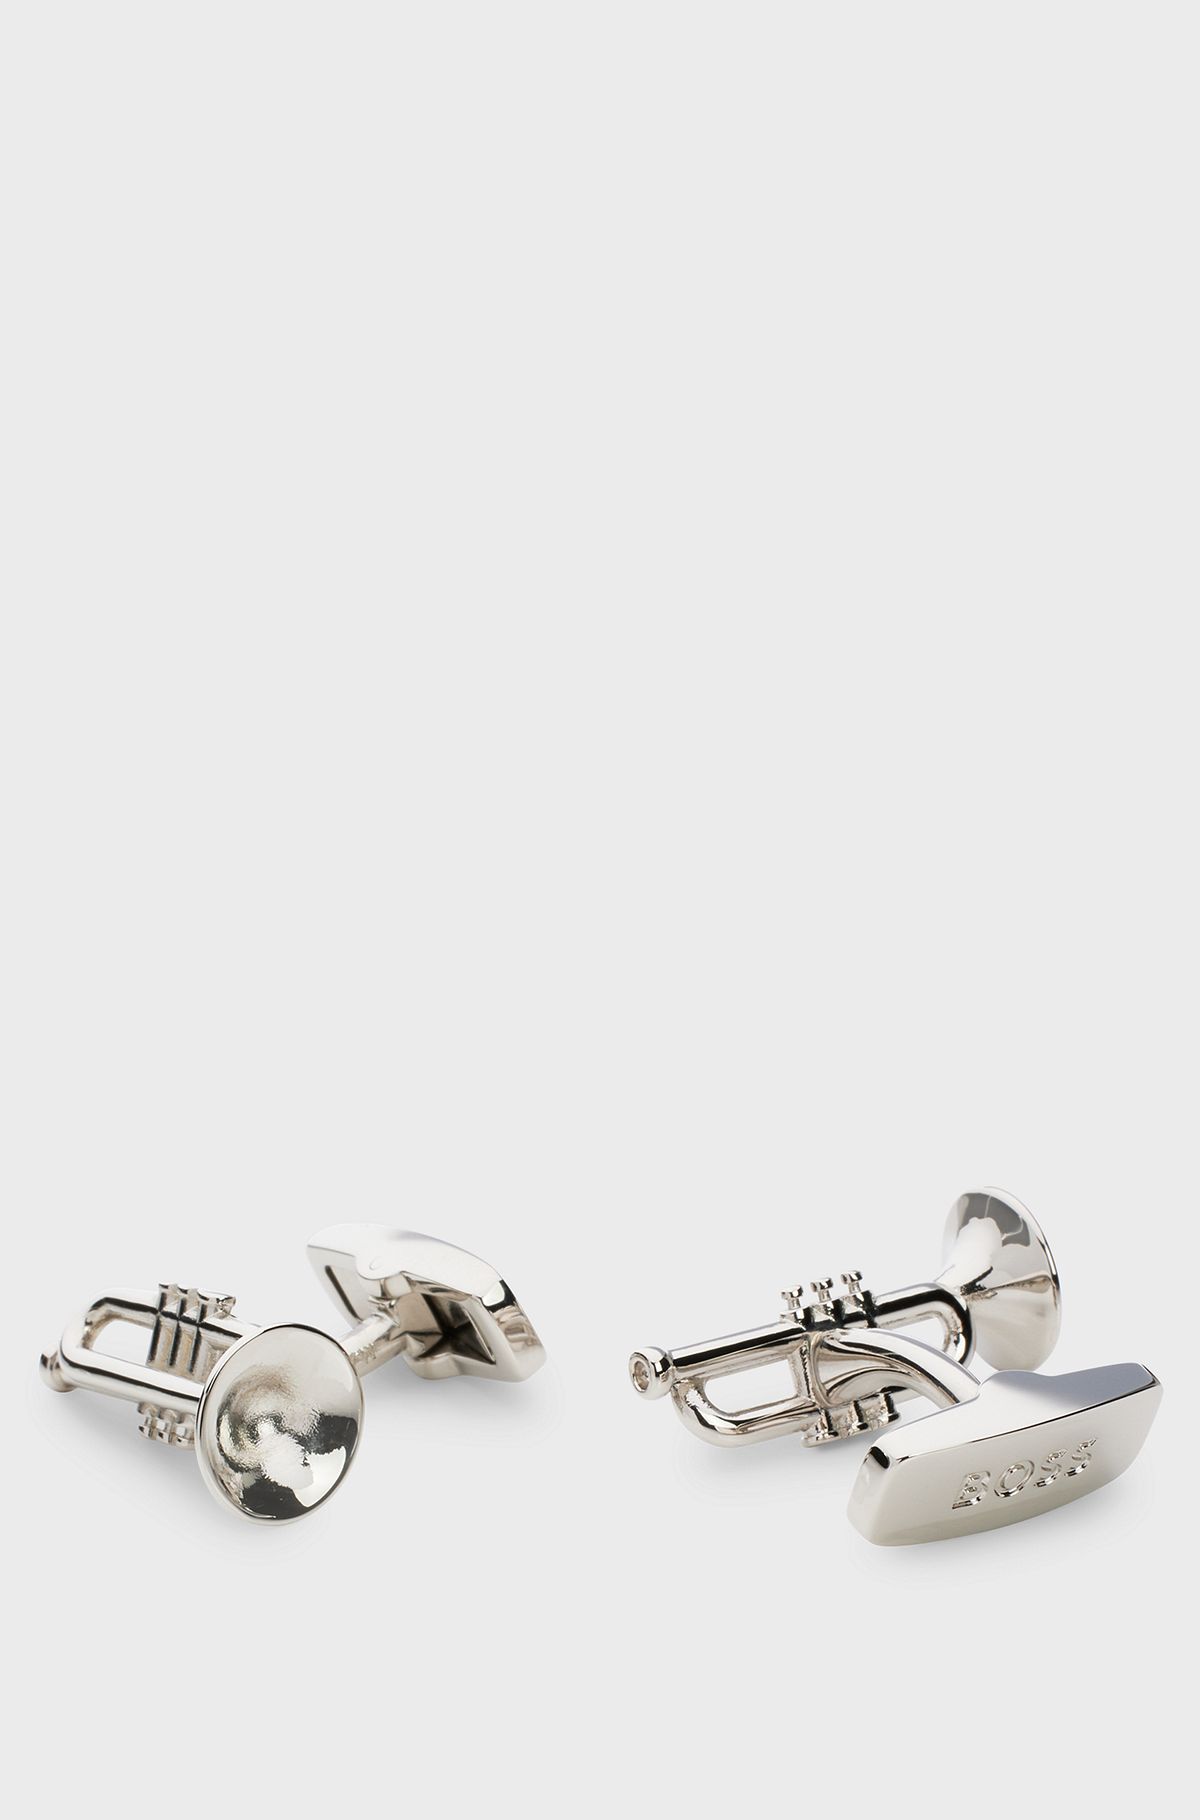 Italian-made cufflinks with trumpet head and branded fastening, Silver